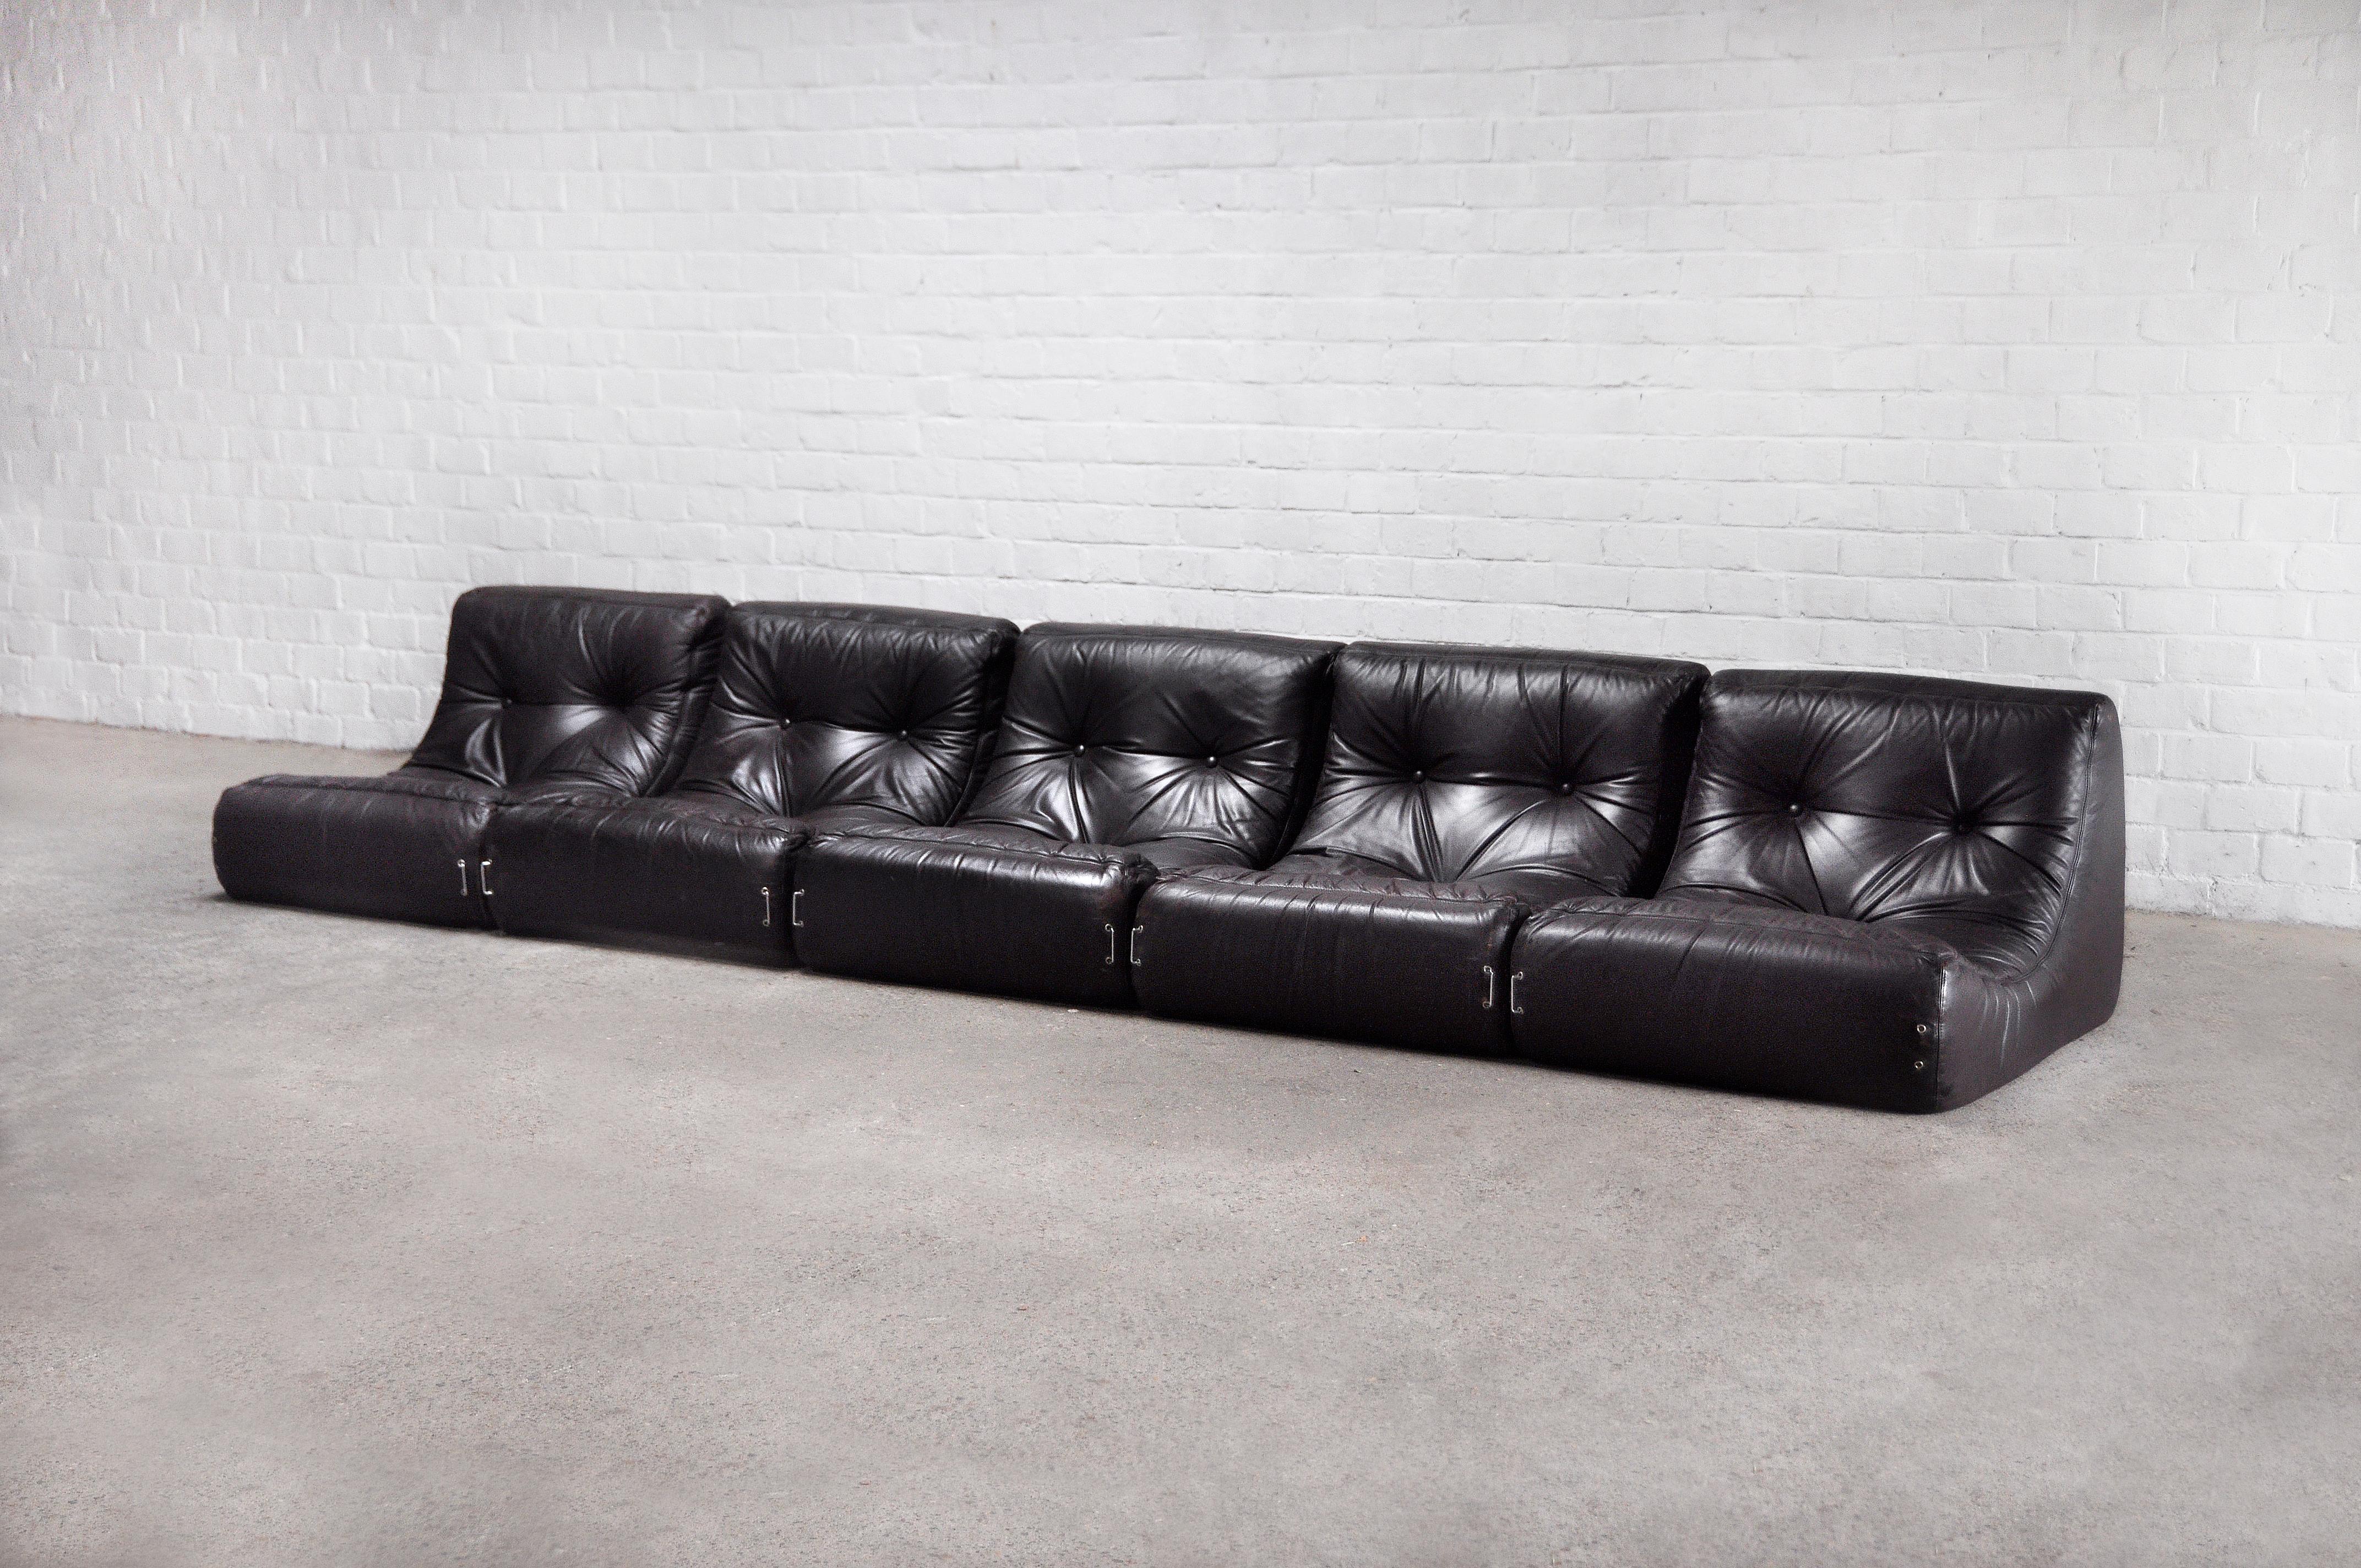 Space Age Space-Age Leather Modular Sofa Set Attributed to Michel Ducaroy, France 1970’s